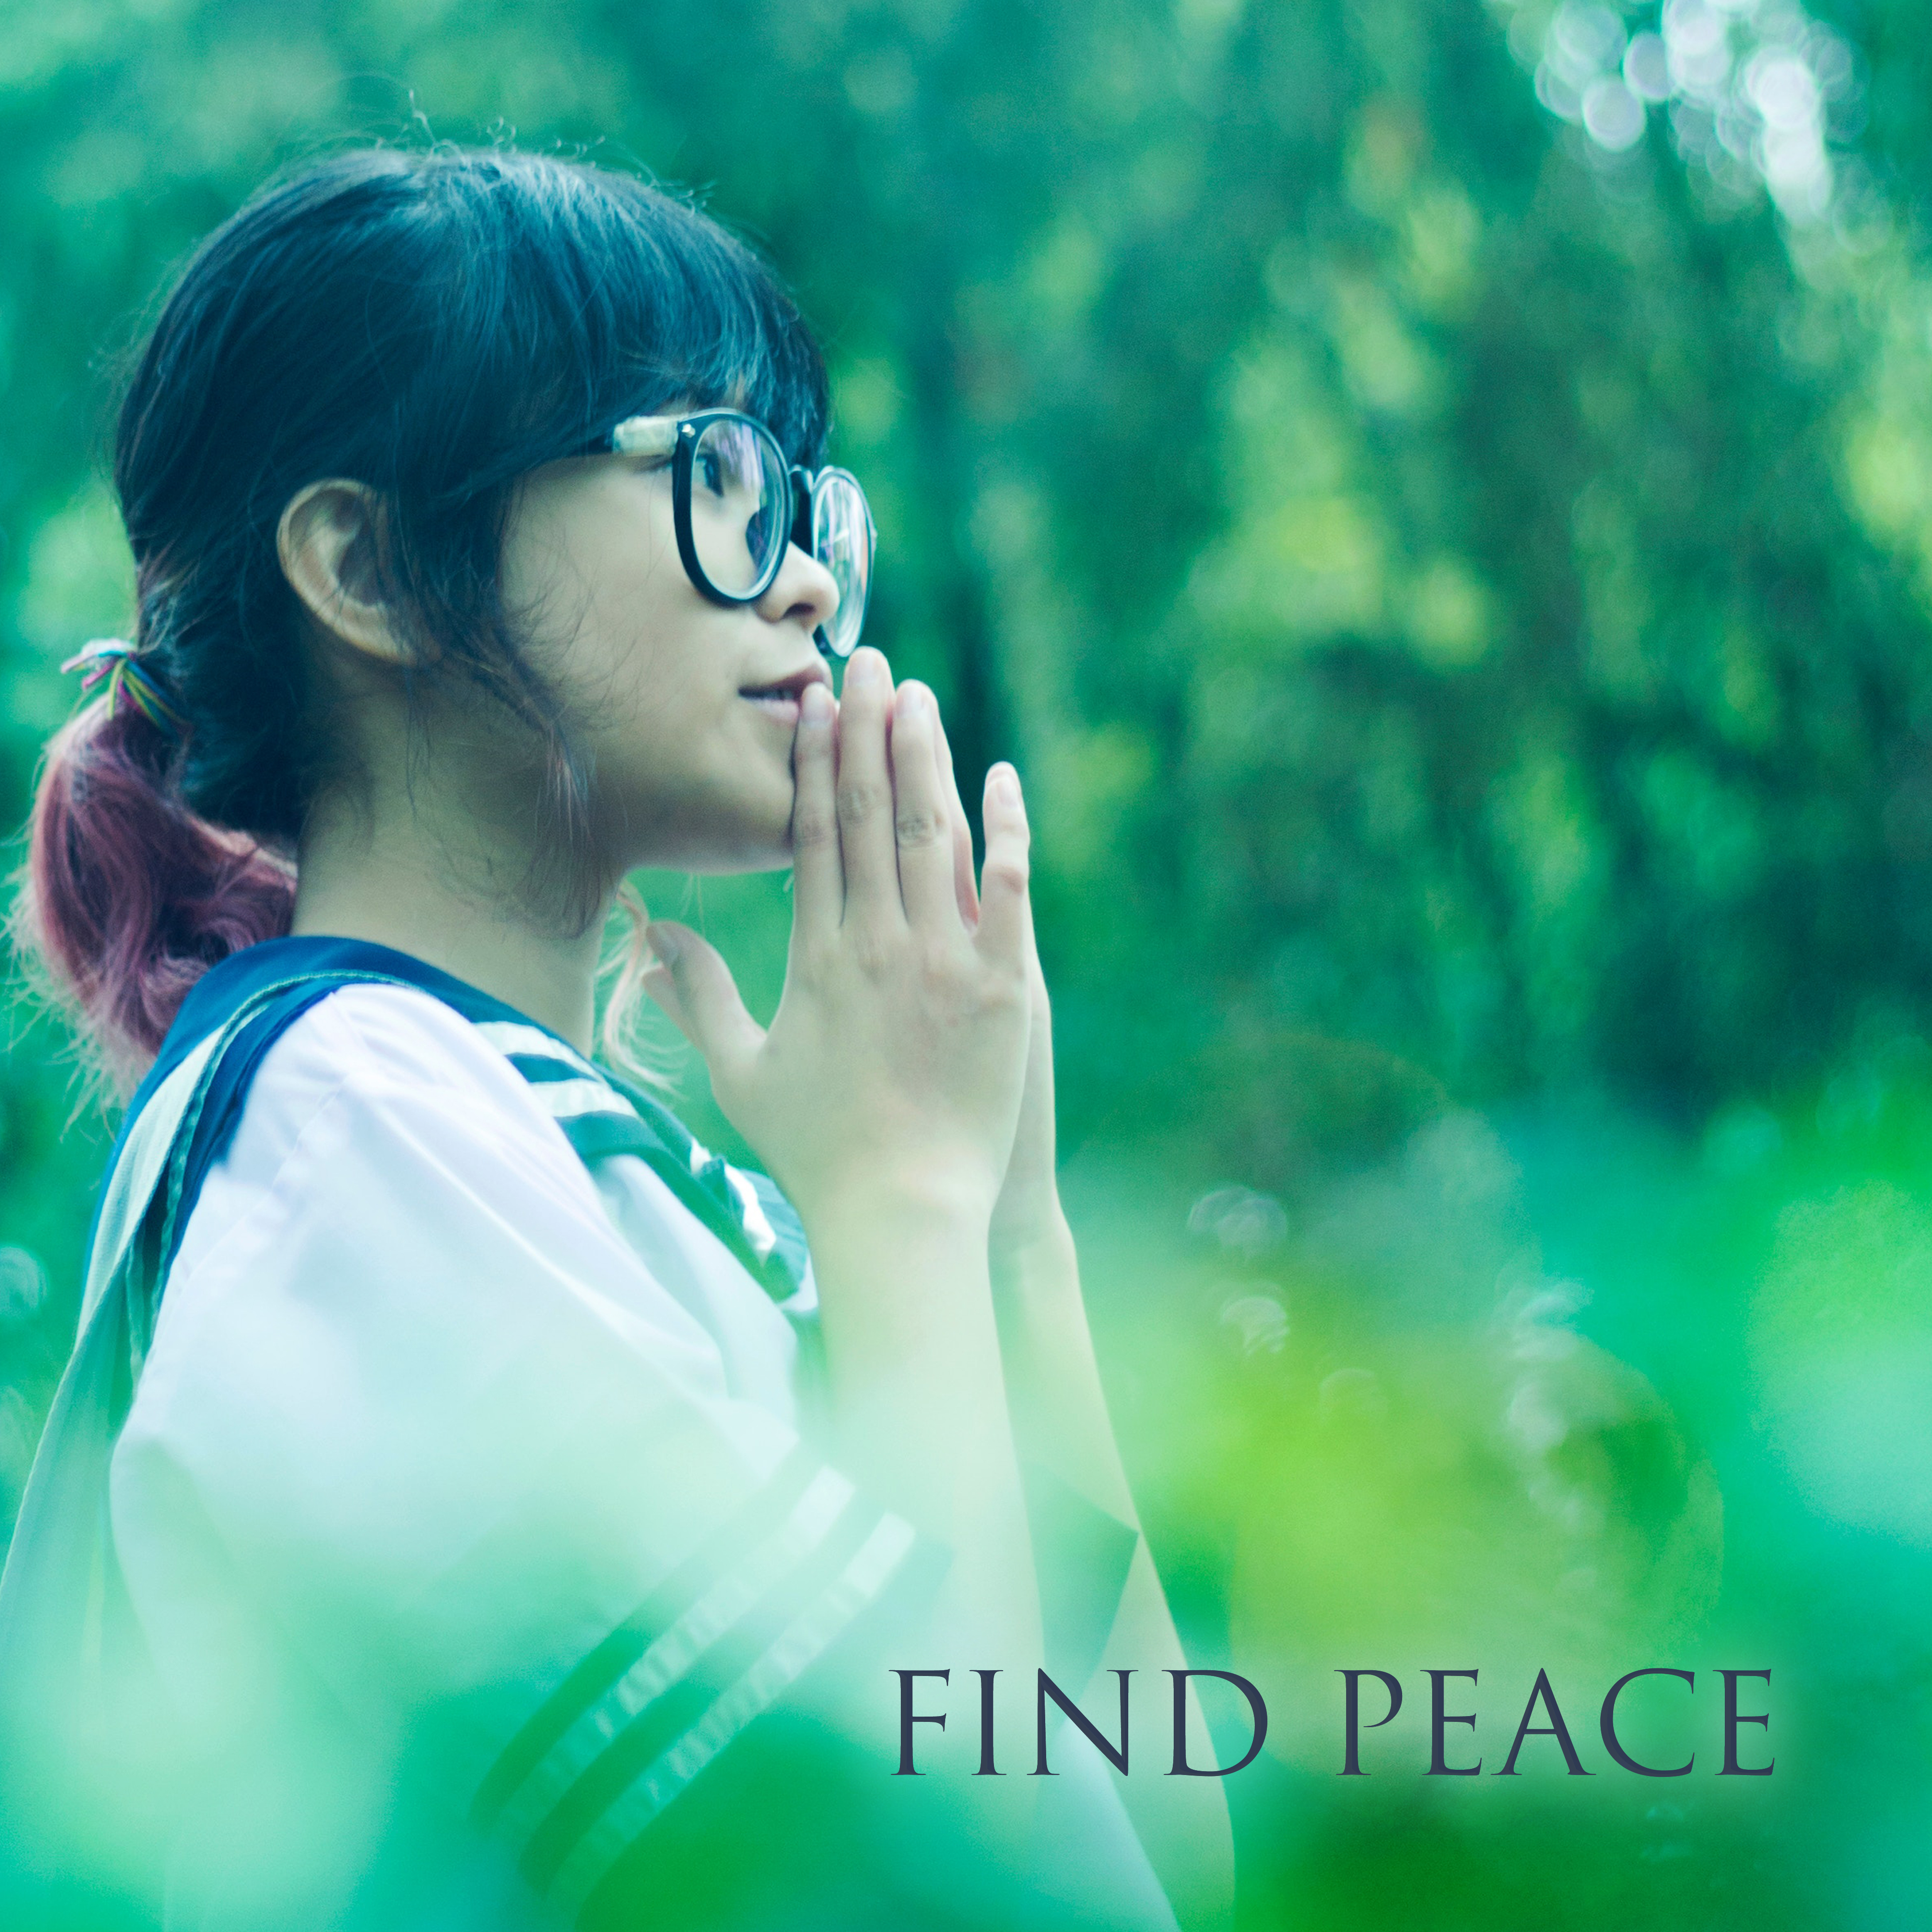 Find Peace – Meditation Sounds, Peaceful Sounds, Buddha Lounge, New Age Songs to Meditate